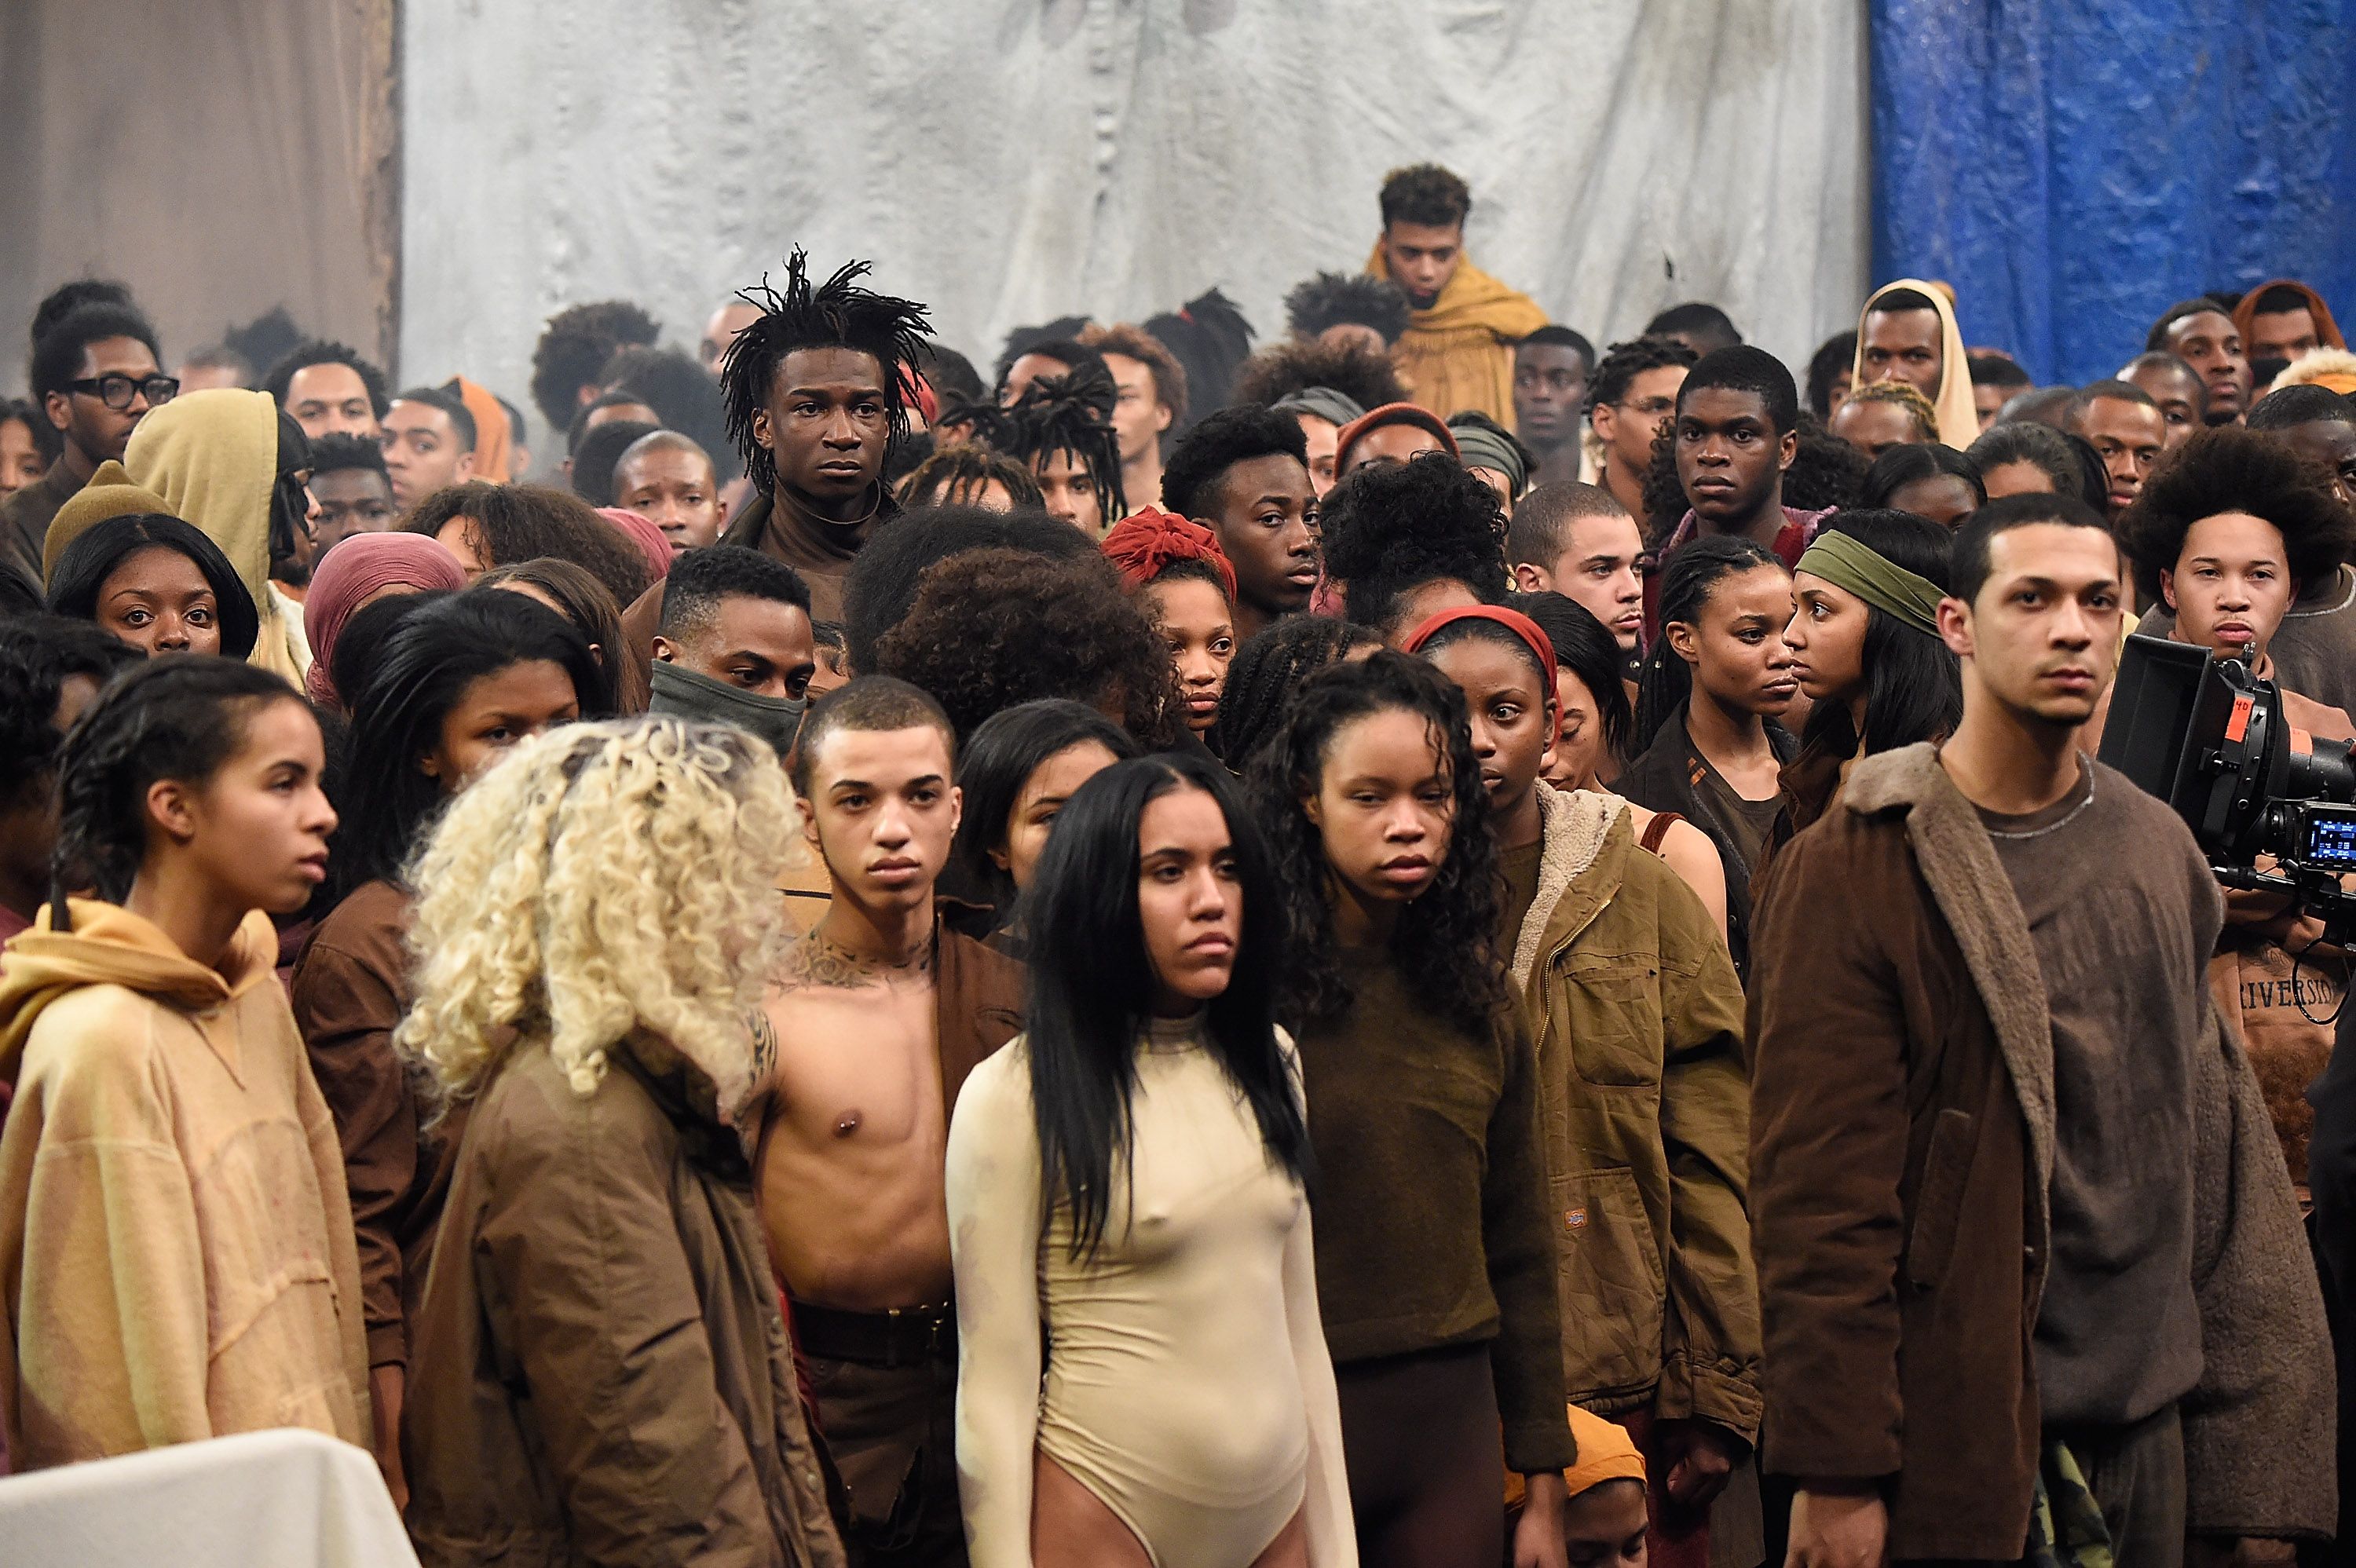 I Was Cast As An Extra In The Yeezy Season 3 Show - Yeezy Season 3 Adidas  Show at Madison Square Garden